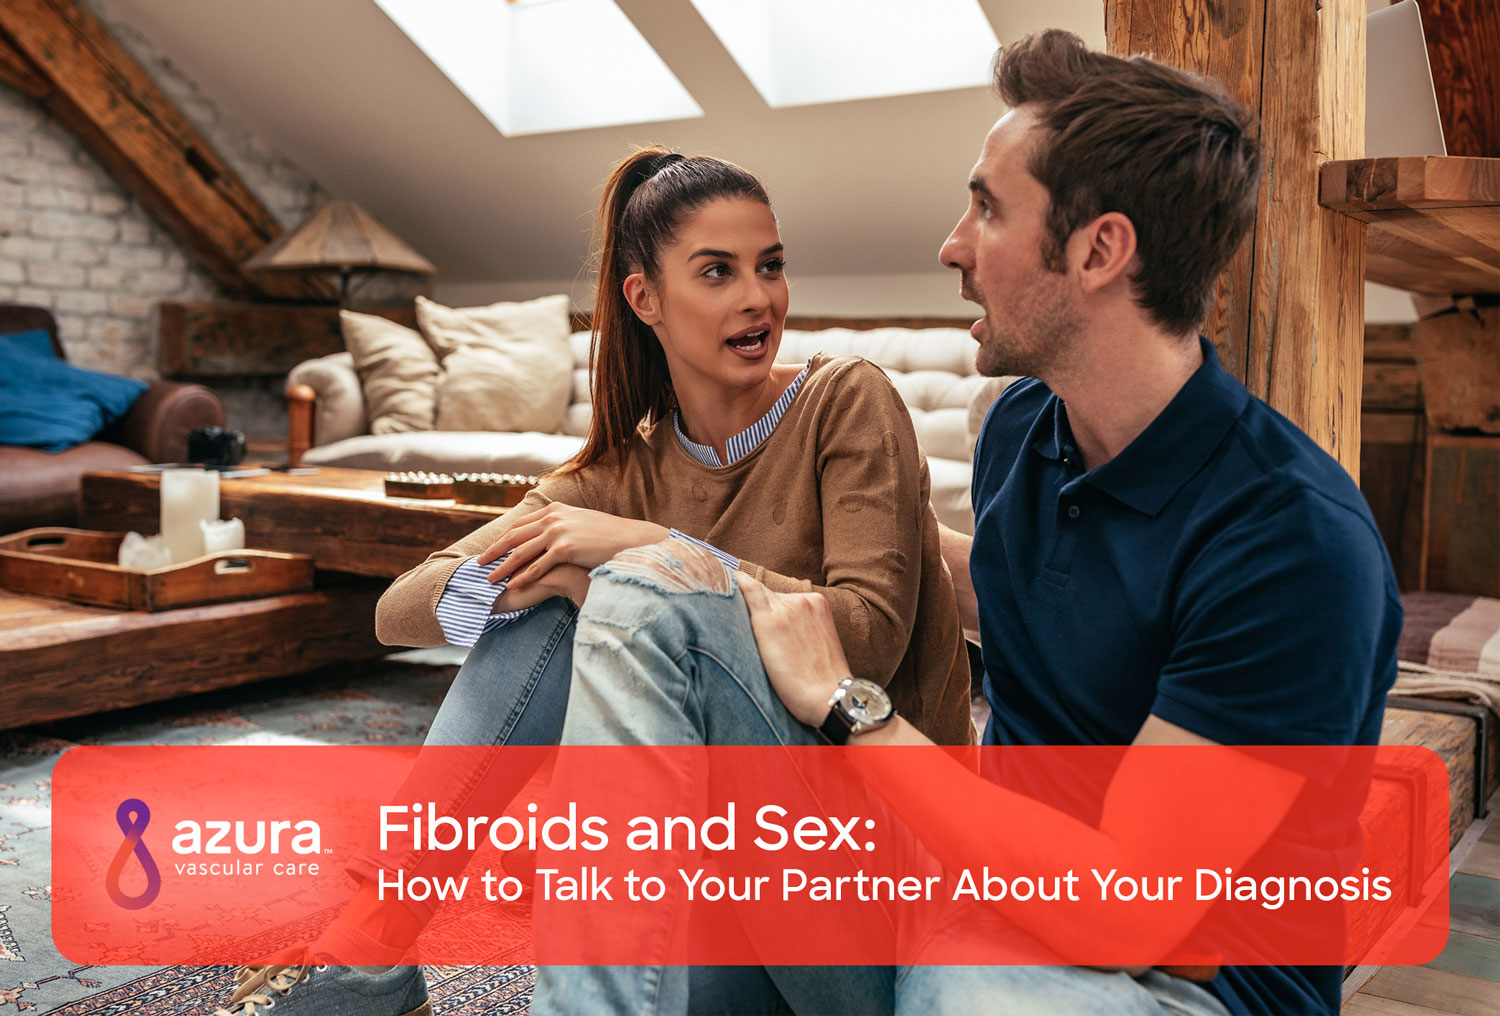 How to Talk to Your Partner About Your Fibroid Diagnosis pic